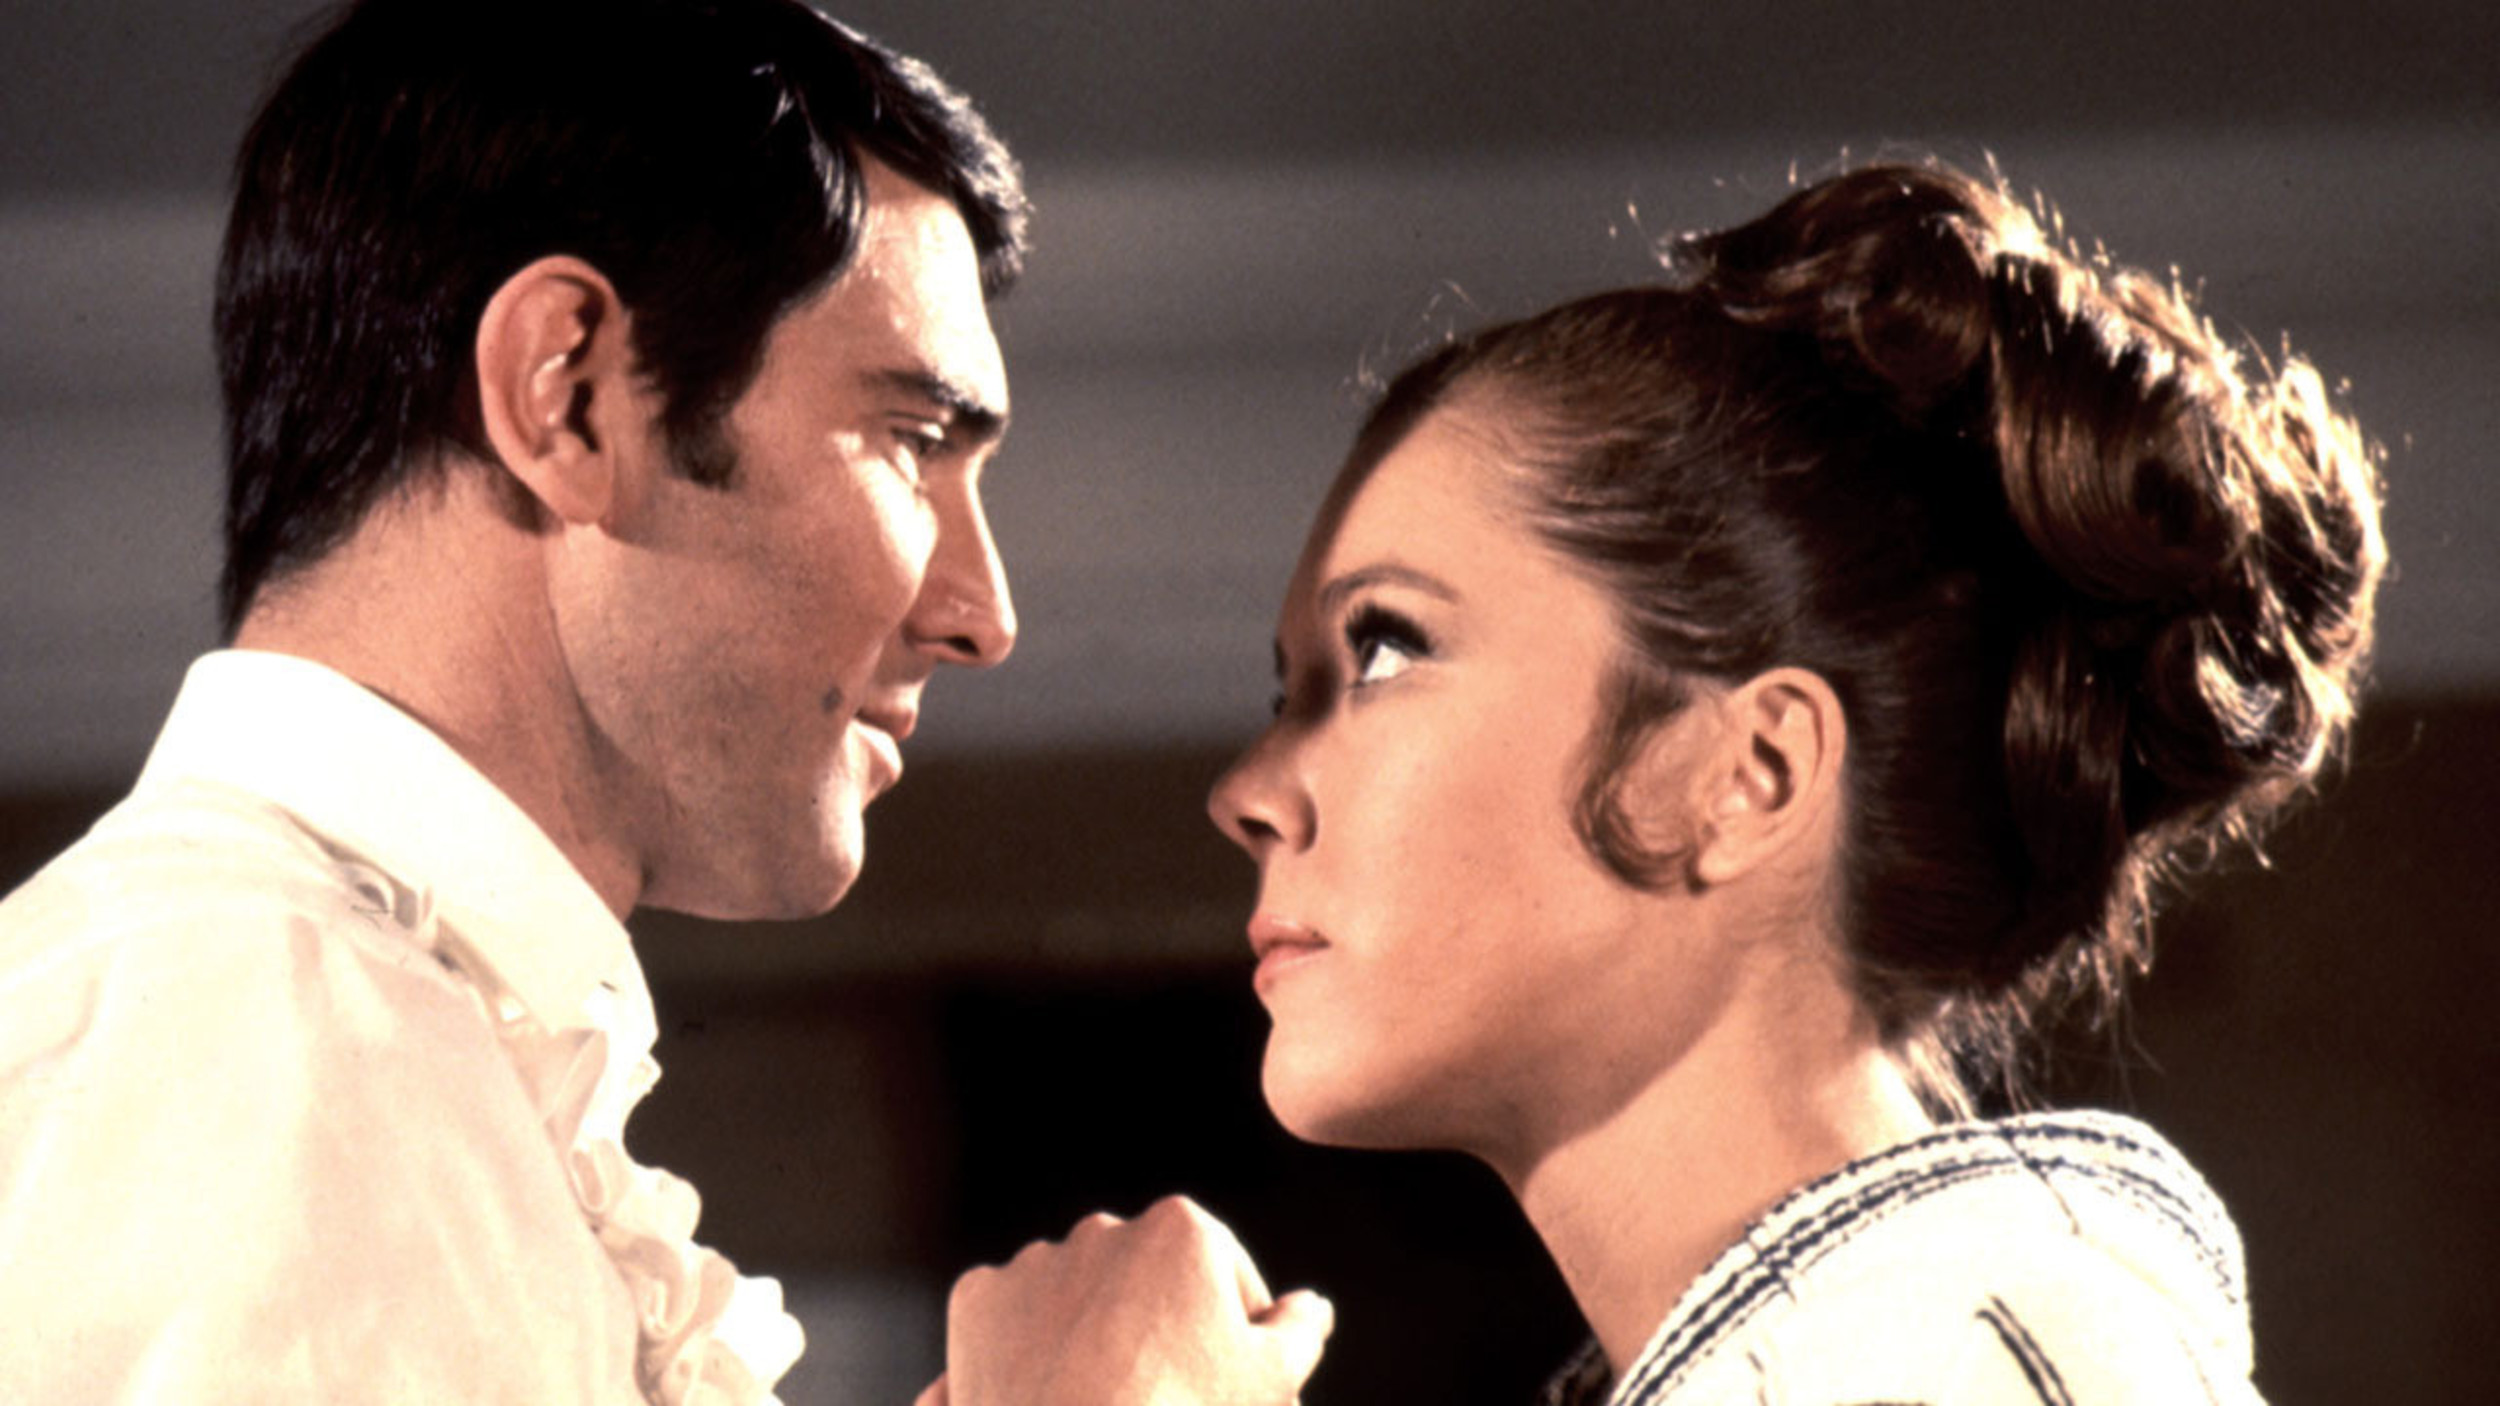 <p>The broken heart of the James Bond franchise features the best ever Bond girl (Diana Rigg), the best John Barry score, the best story, some of the best, <a href="http://extension765.com/soderblogh/2-most-irrelevant-no-1" rel="noopener noreferrer">most meticulously constructed action set pieces</a> ever put to film and…George Lazenby. Taking over for Sean Connery was a thankless task to begin with, and screenwriter Richard Maibaum didn’t do Lazenby any favors in his first (and last) Bond performance by writing him a very Connery-ish script. But could Connery have projected the vulnerability necessary to put over the tragic romance with Rigg’s Tracy? It’s a shame this project didn’t arrive earlier in Connery’s tenure, when he wasn’t checked out. Then this wouldn’t be a debate. Not even close.</p>